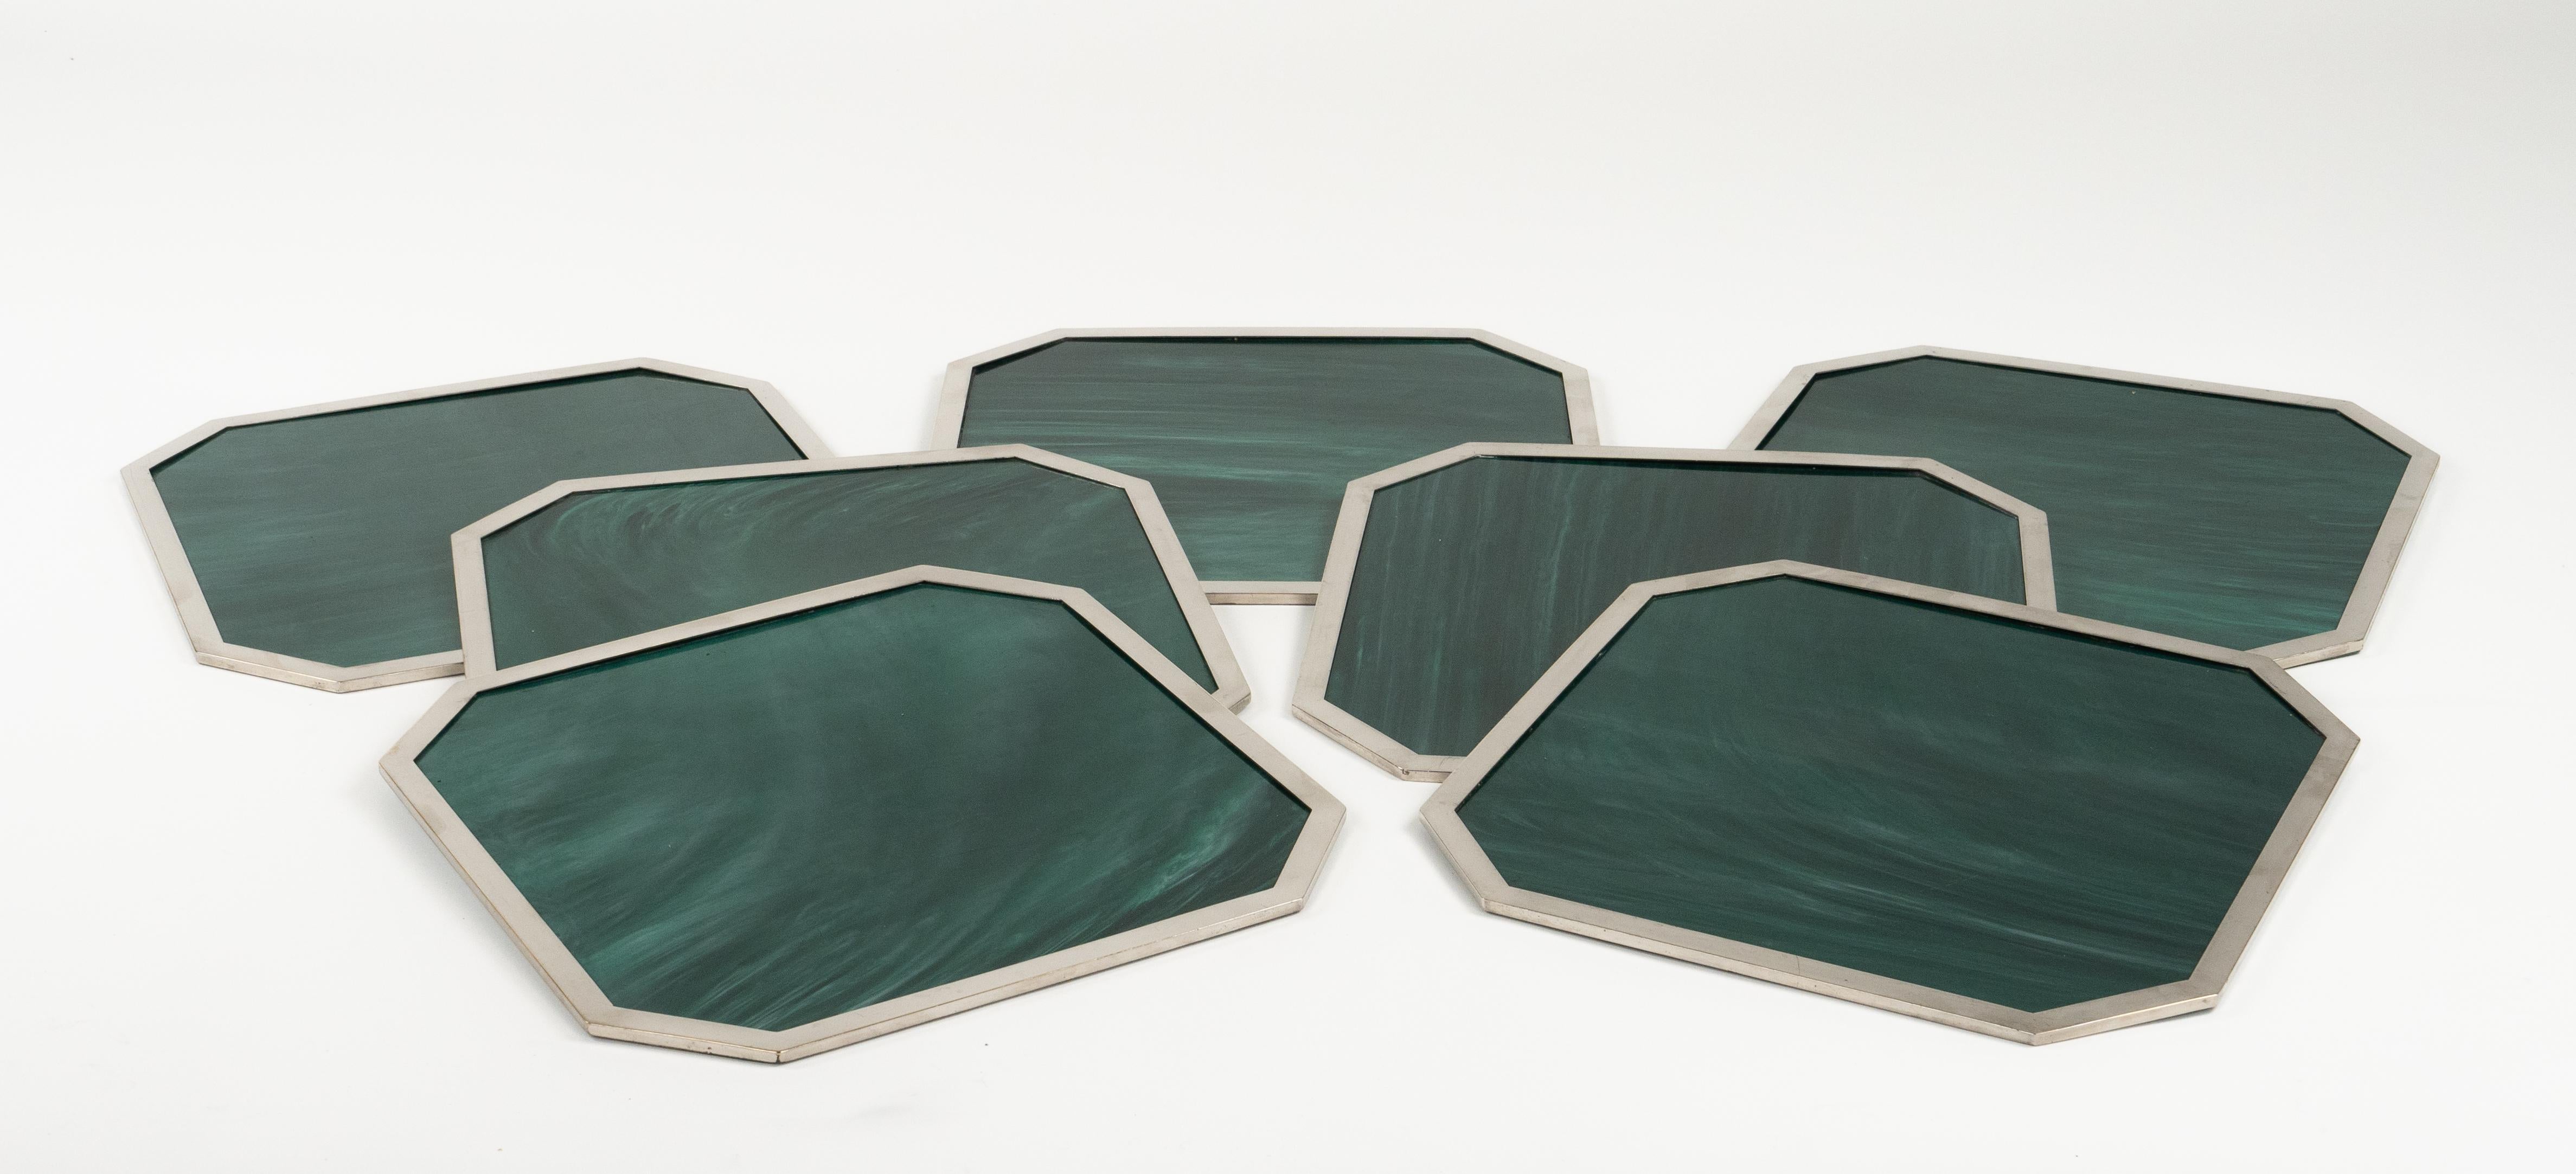 Set of Seven Placemats Marble Effect Acrylic & Chrome by B B Genova, Italy 1970s For Sale 11